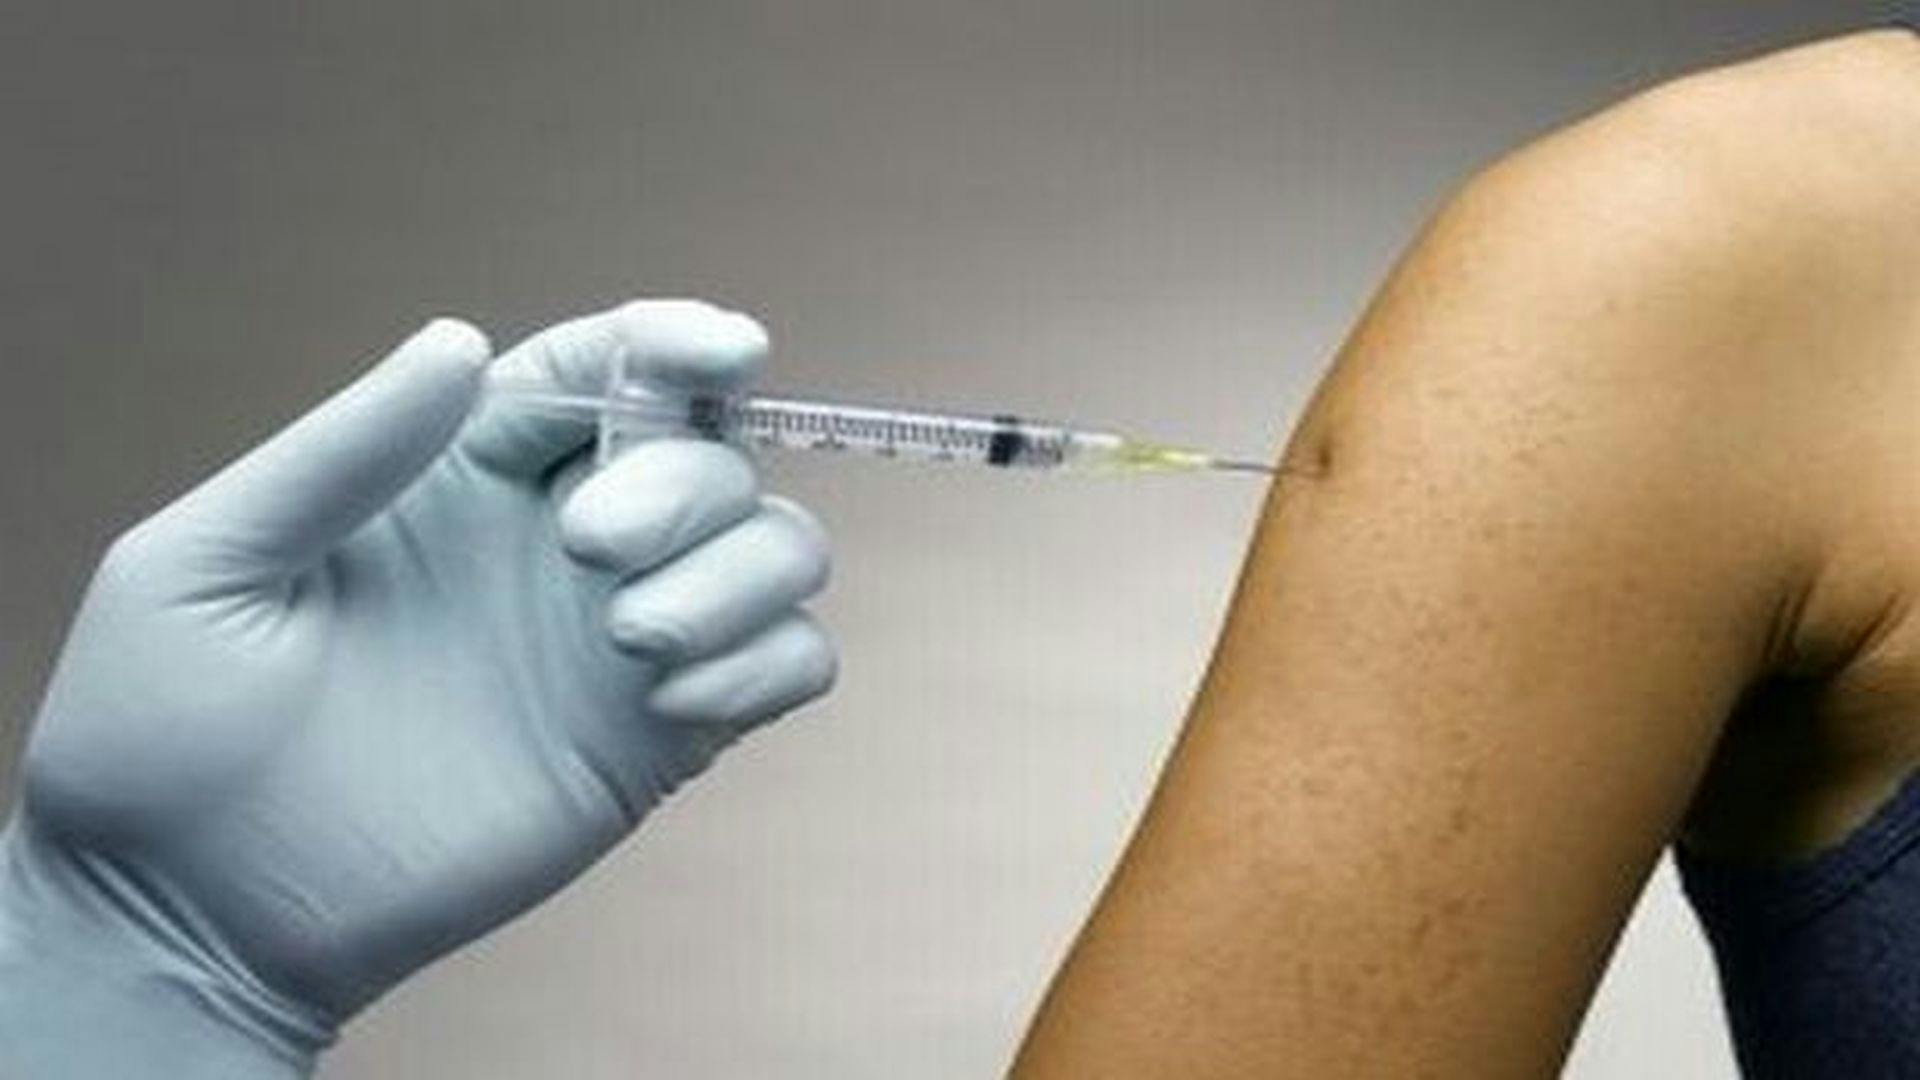 Study Provides Guidelines on How to Prioritize Vaccination During Flu Season